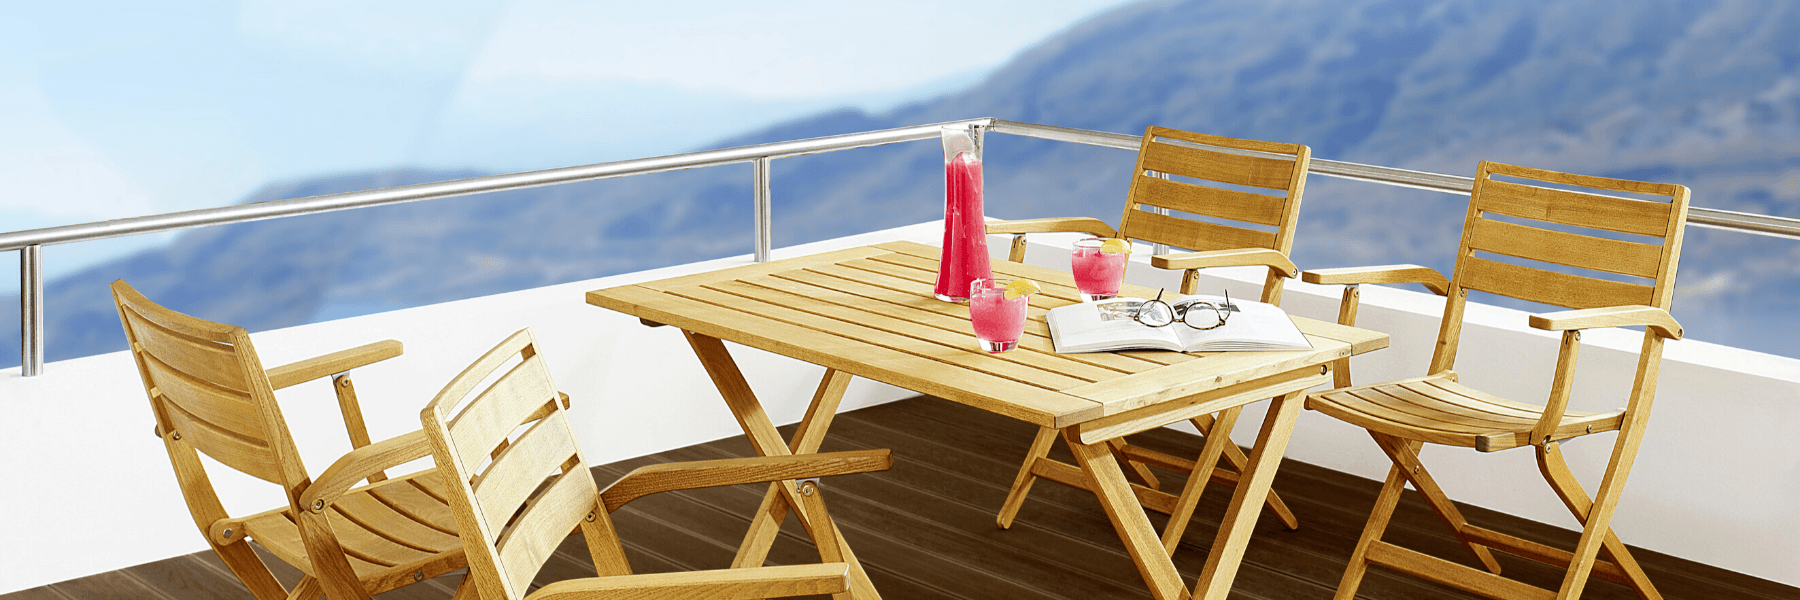 Sorrento foldable Armchairs with table in a hotel balcony restaurant terrace setting